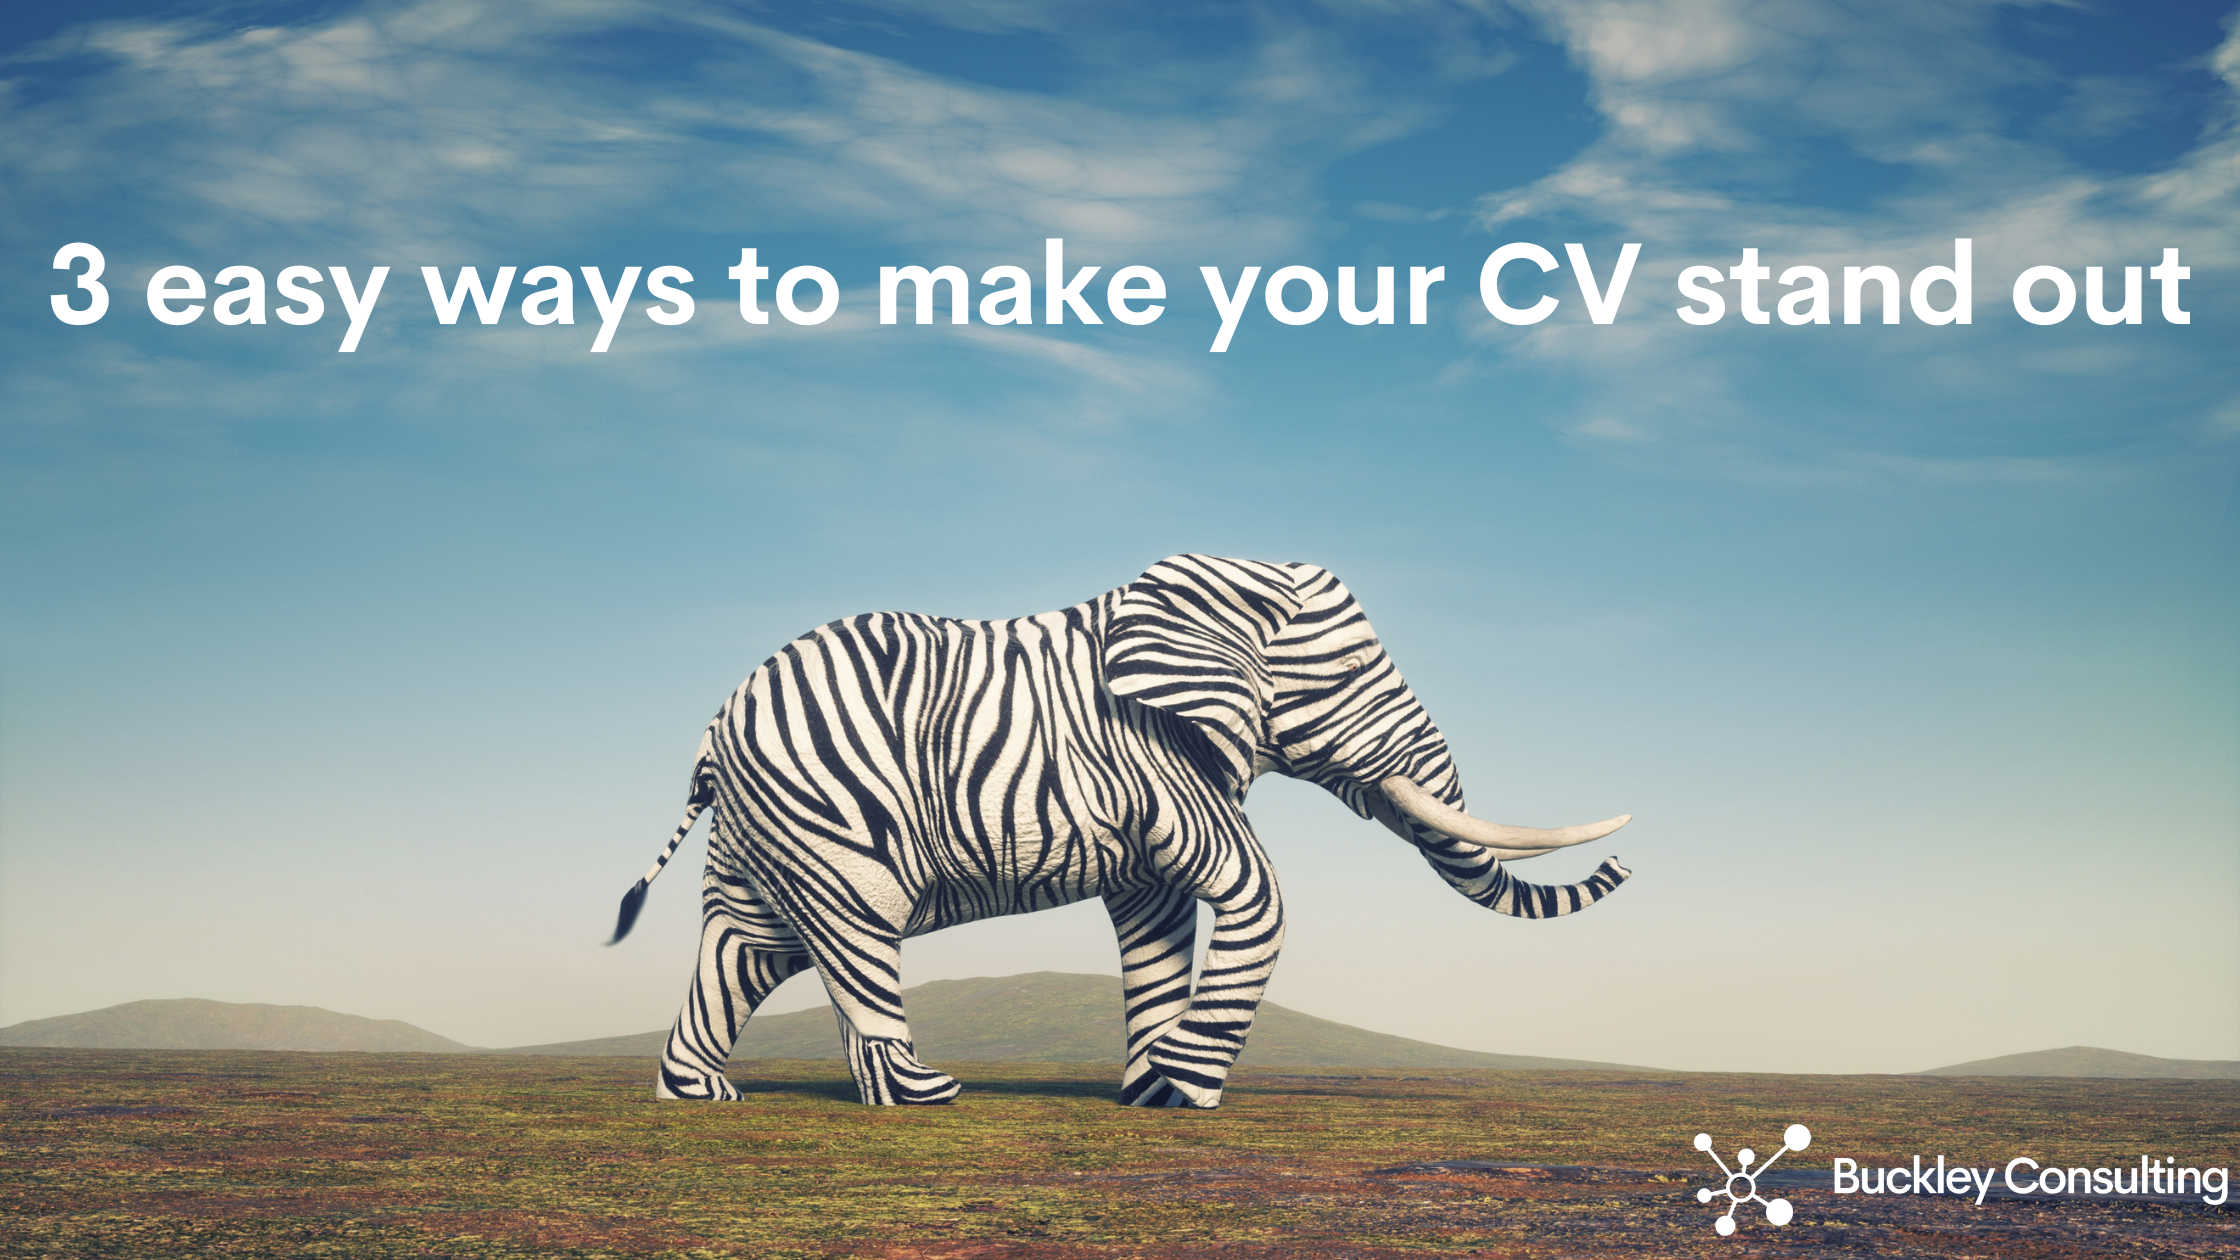 3 easy ways to make your CV stand out